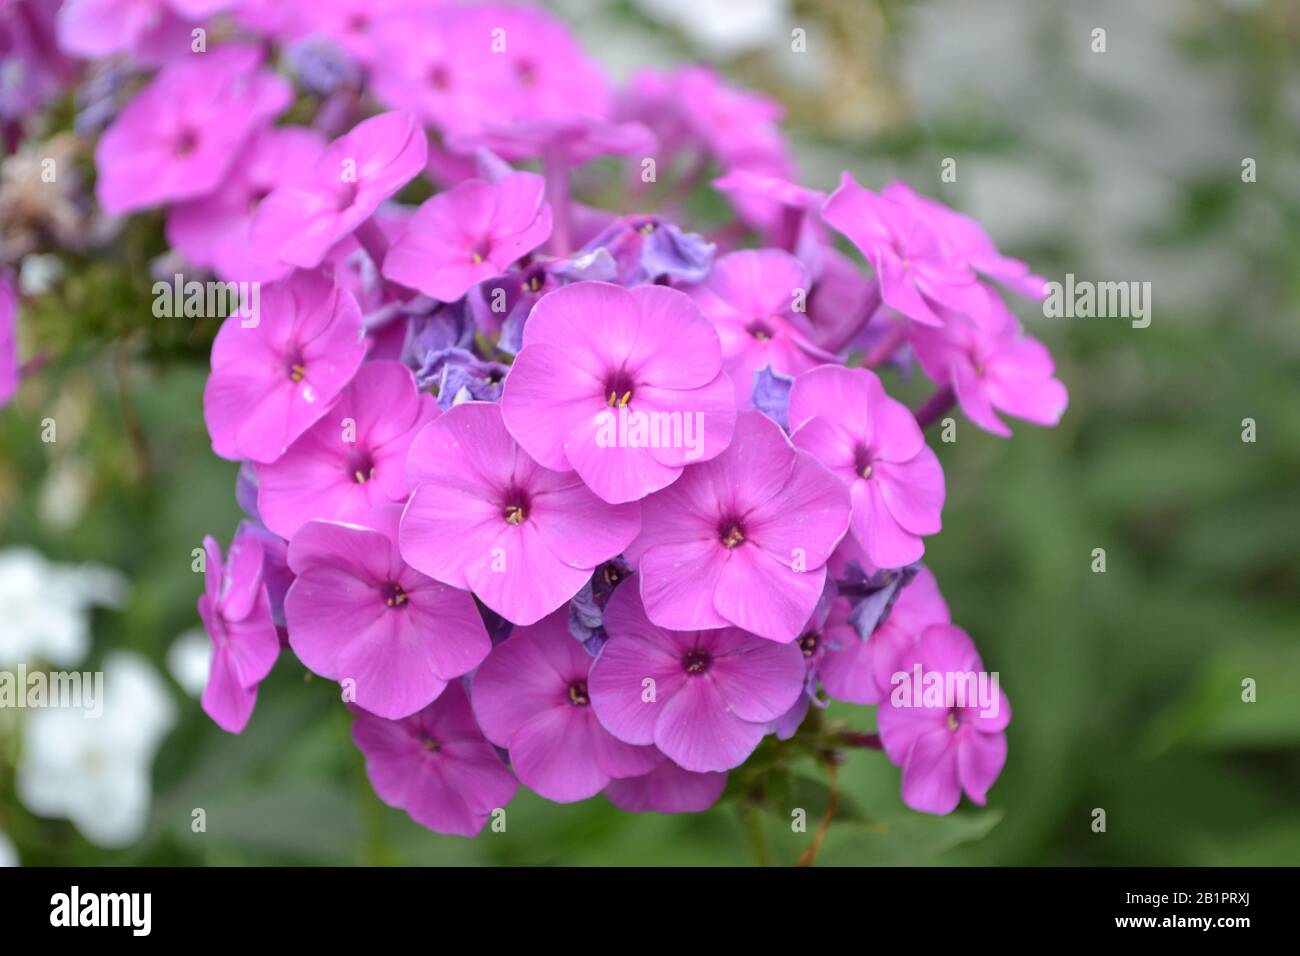 Phlox. Polemoniaceae. Growing flowers. Flowerbed. Garden. Floriculture. Violet inflorescence. Beautiful flowers. Green leaves. High bushes. Summer day Stock Photo